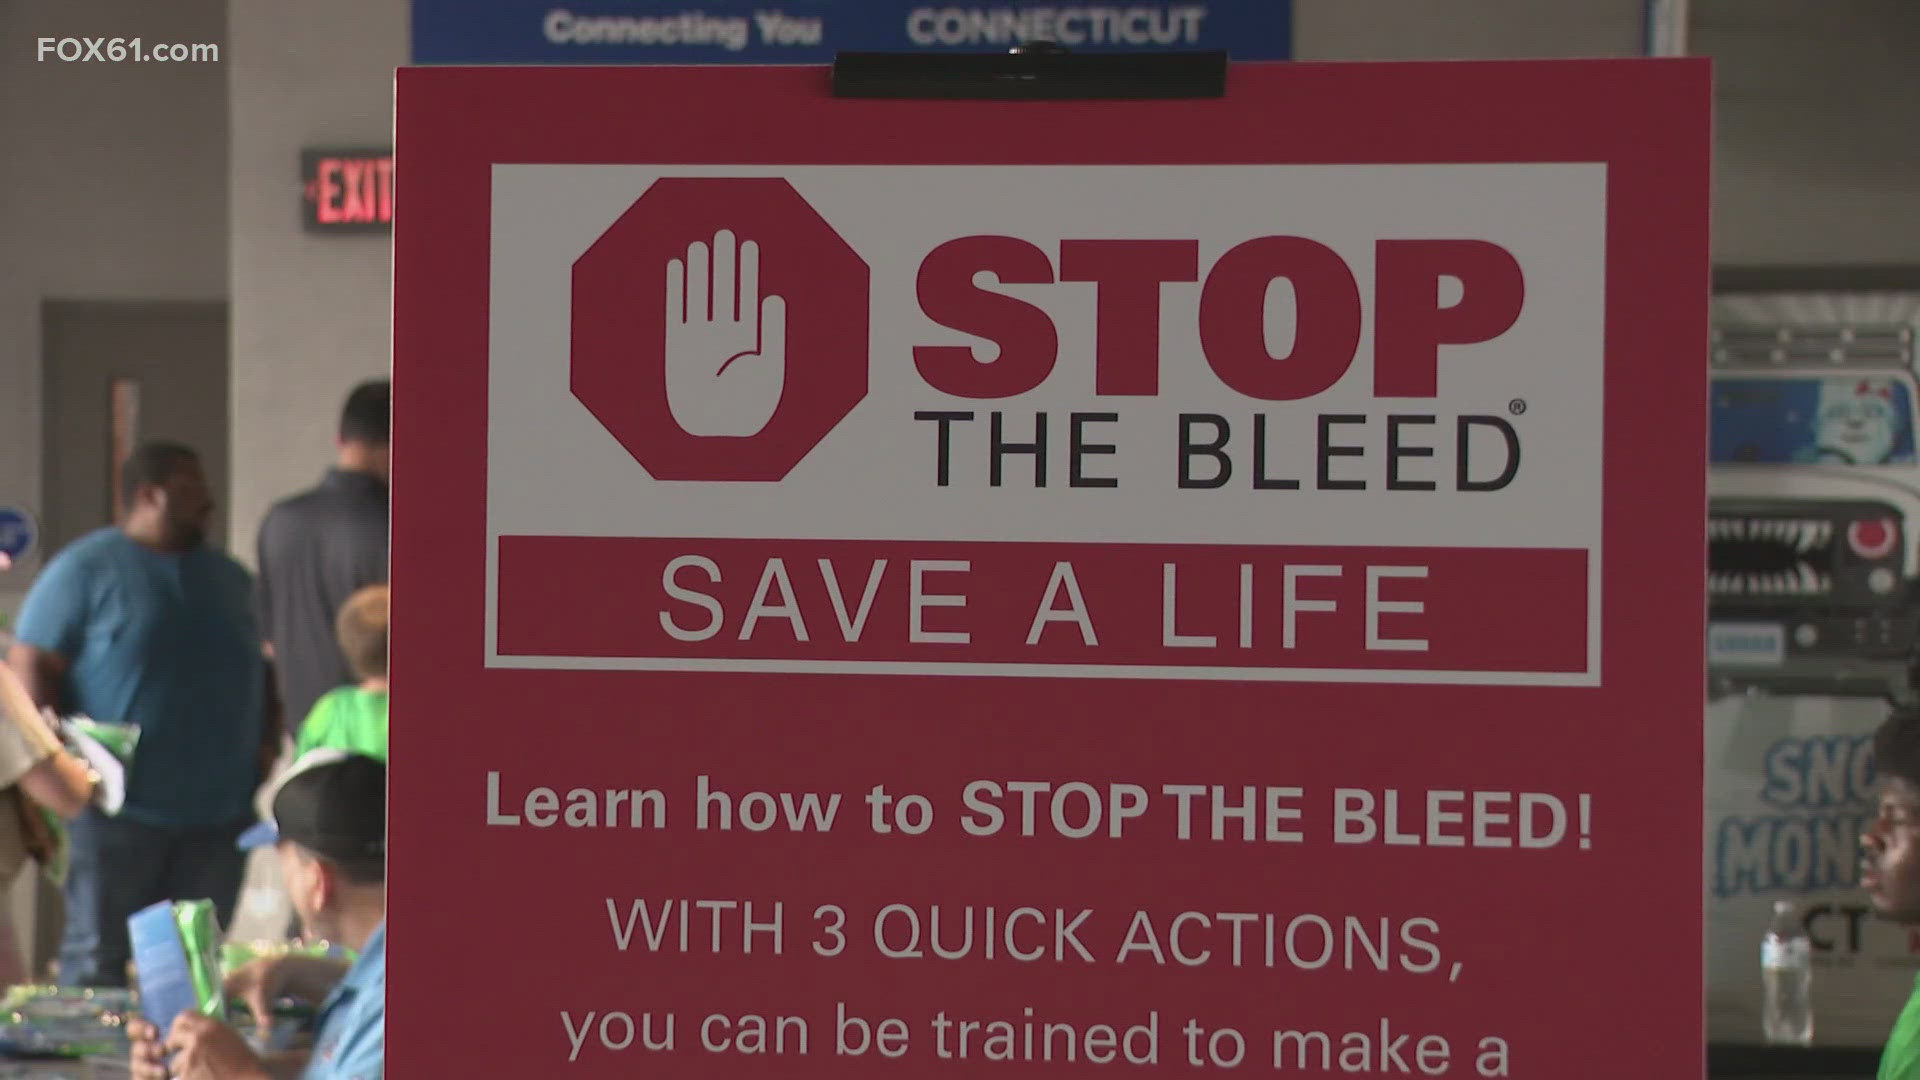 The Yard Goats invited health care professionals from across the state to help inform residents about the importance of stopping the bleed.